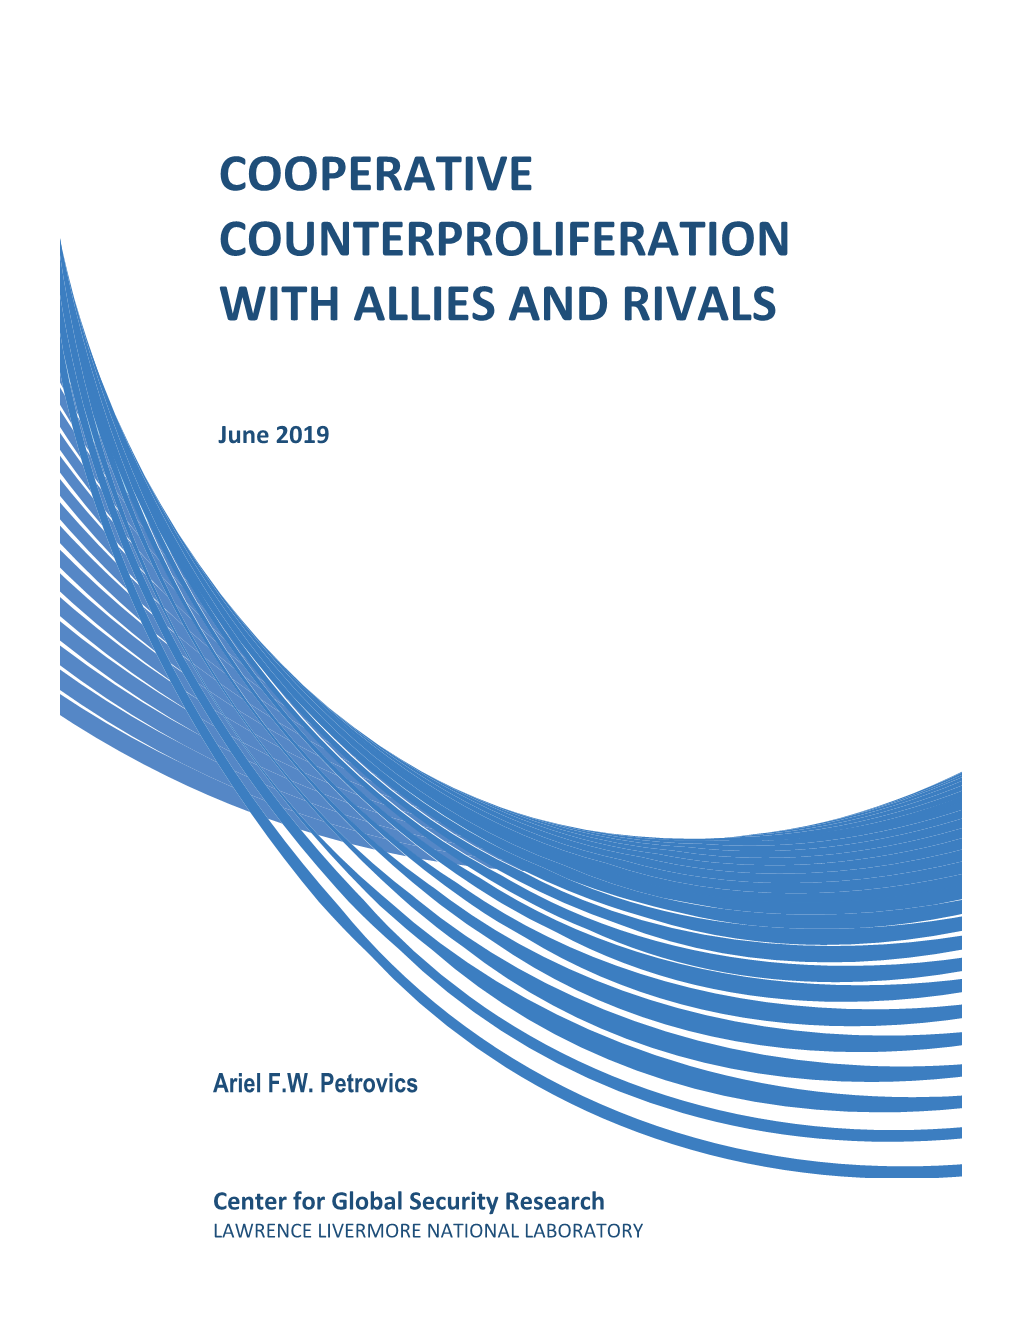 Cooperative Counterproliferation with Allies and Rivals